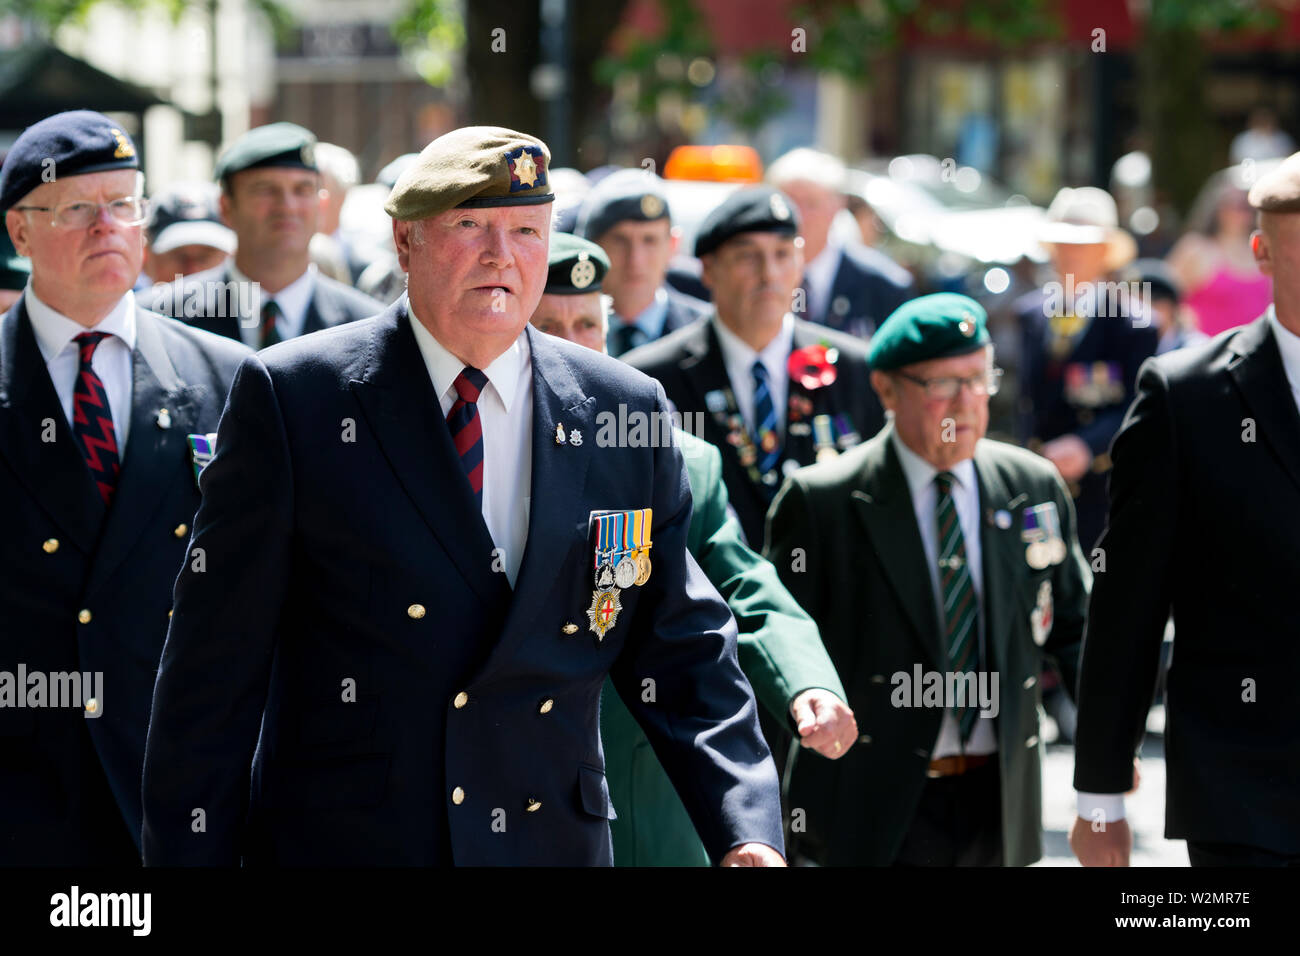 Veterans in the Armed Forces Day parade, Banbury, UK Stock Photo